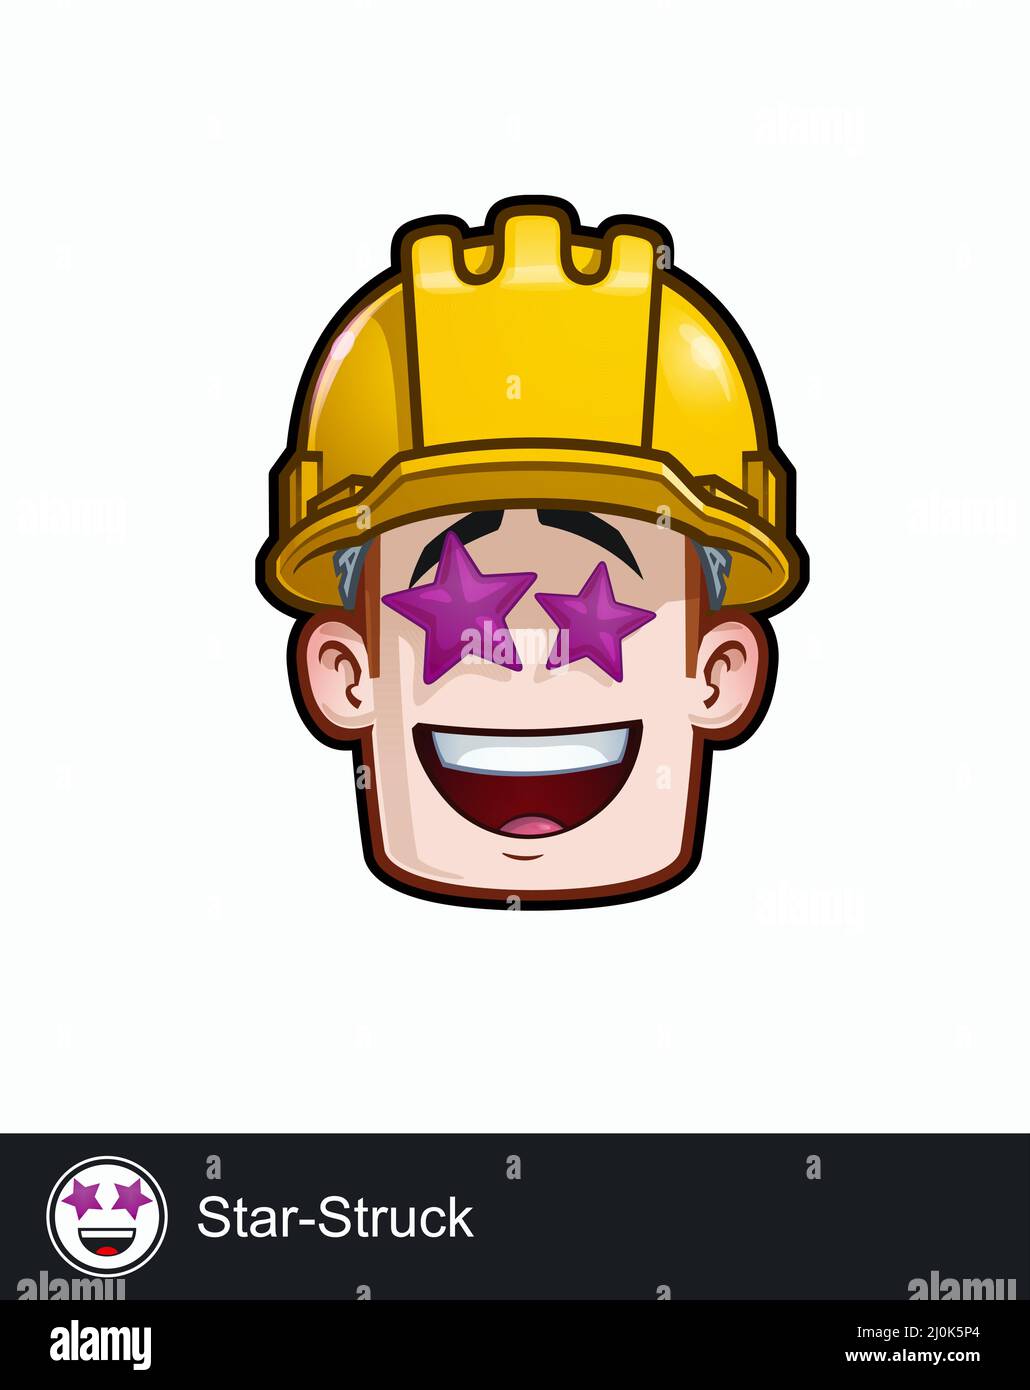 Icon of a construction worker face with Star Struck emotional expression. All elements neatly on well described layers and groups. Stock Vector